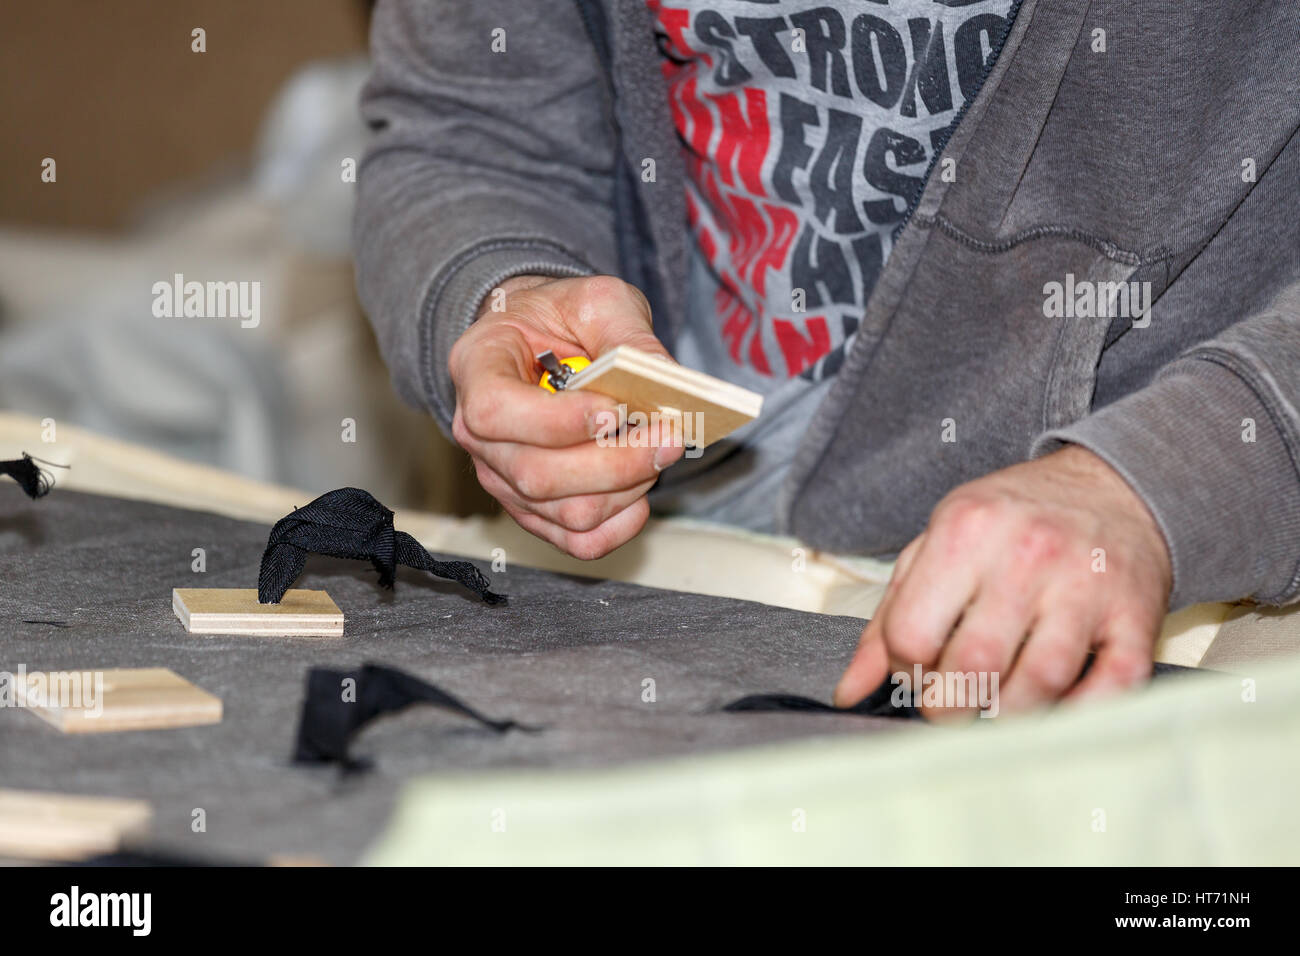 Hand of a man who works with wood products Stock Photo